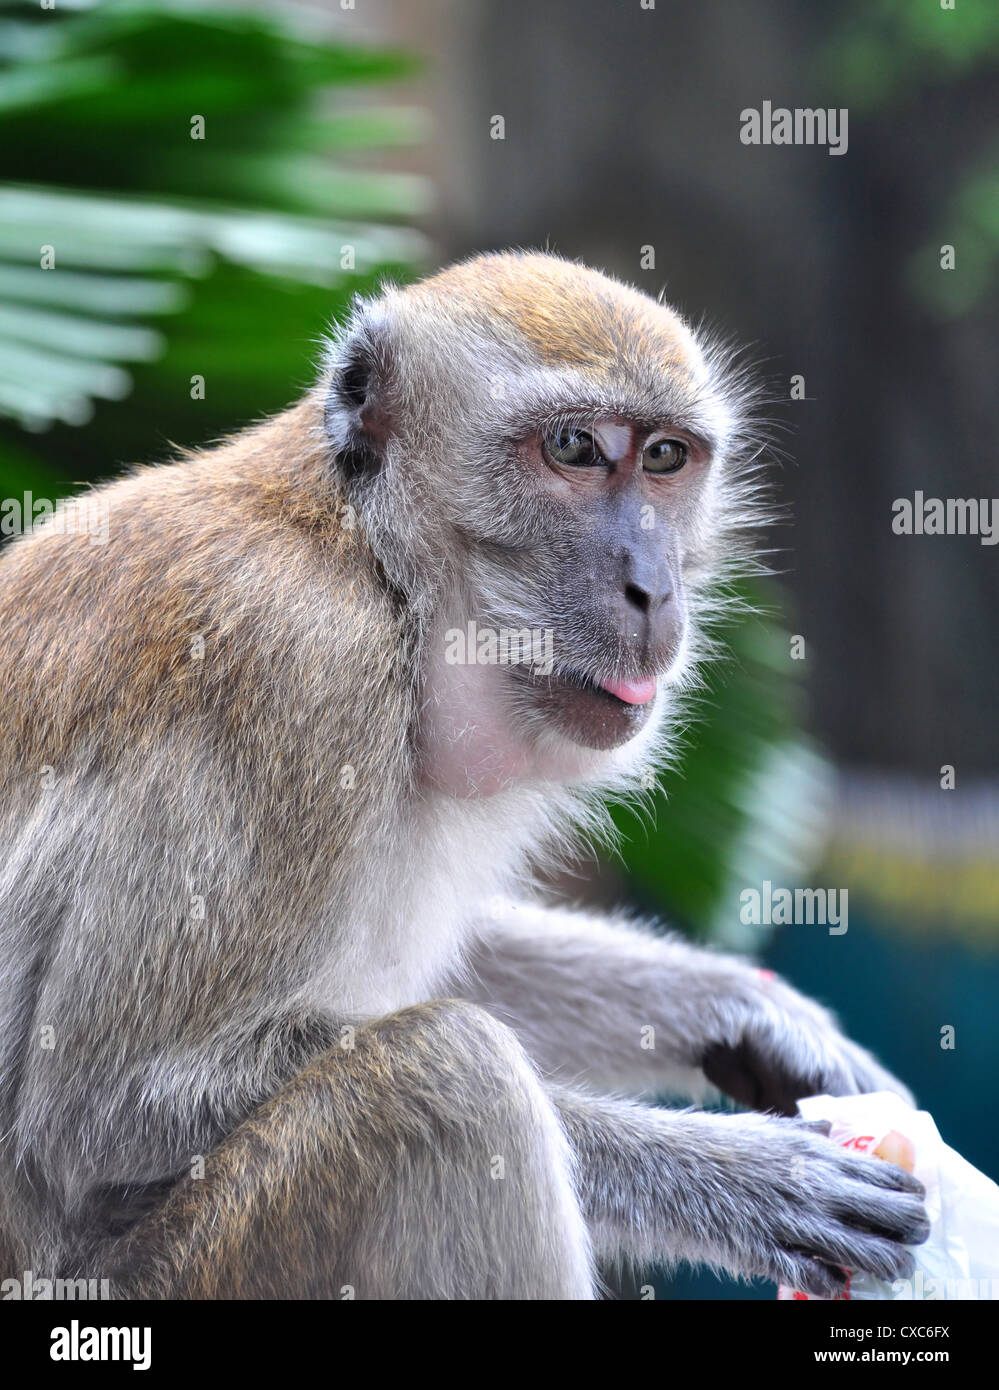 A Portrait of a Monkey with a Plastic Bag Stock Photo